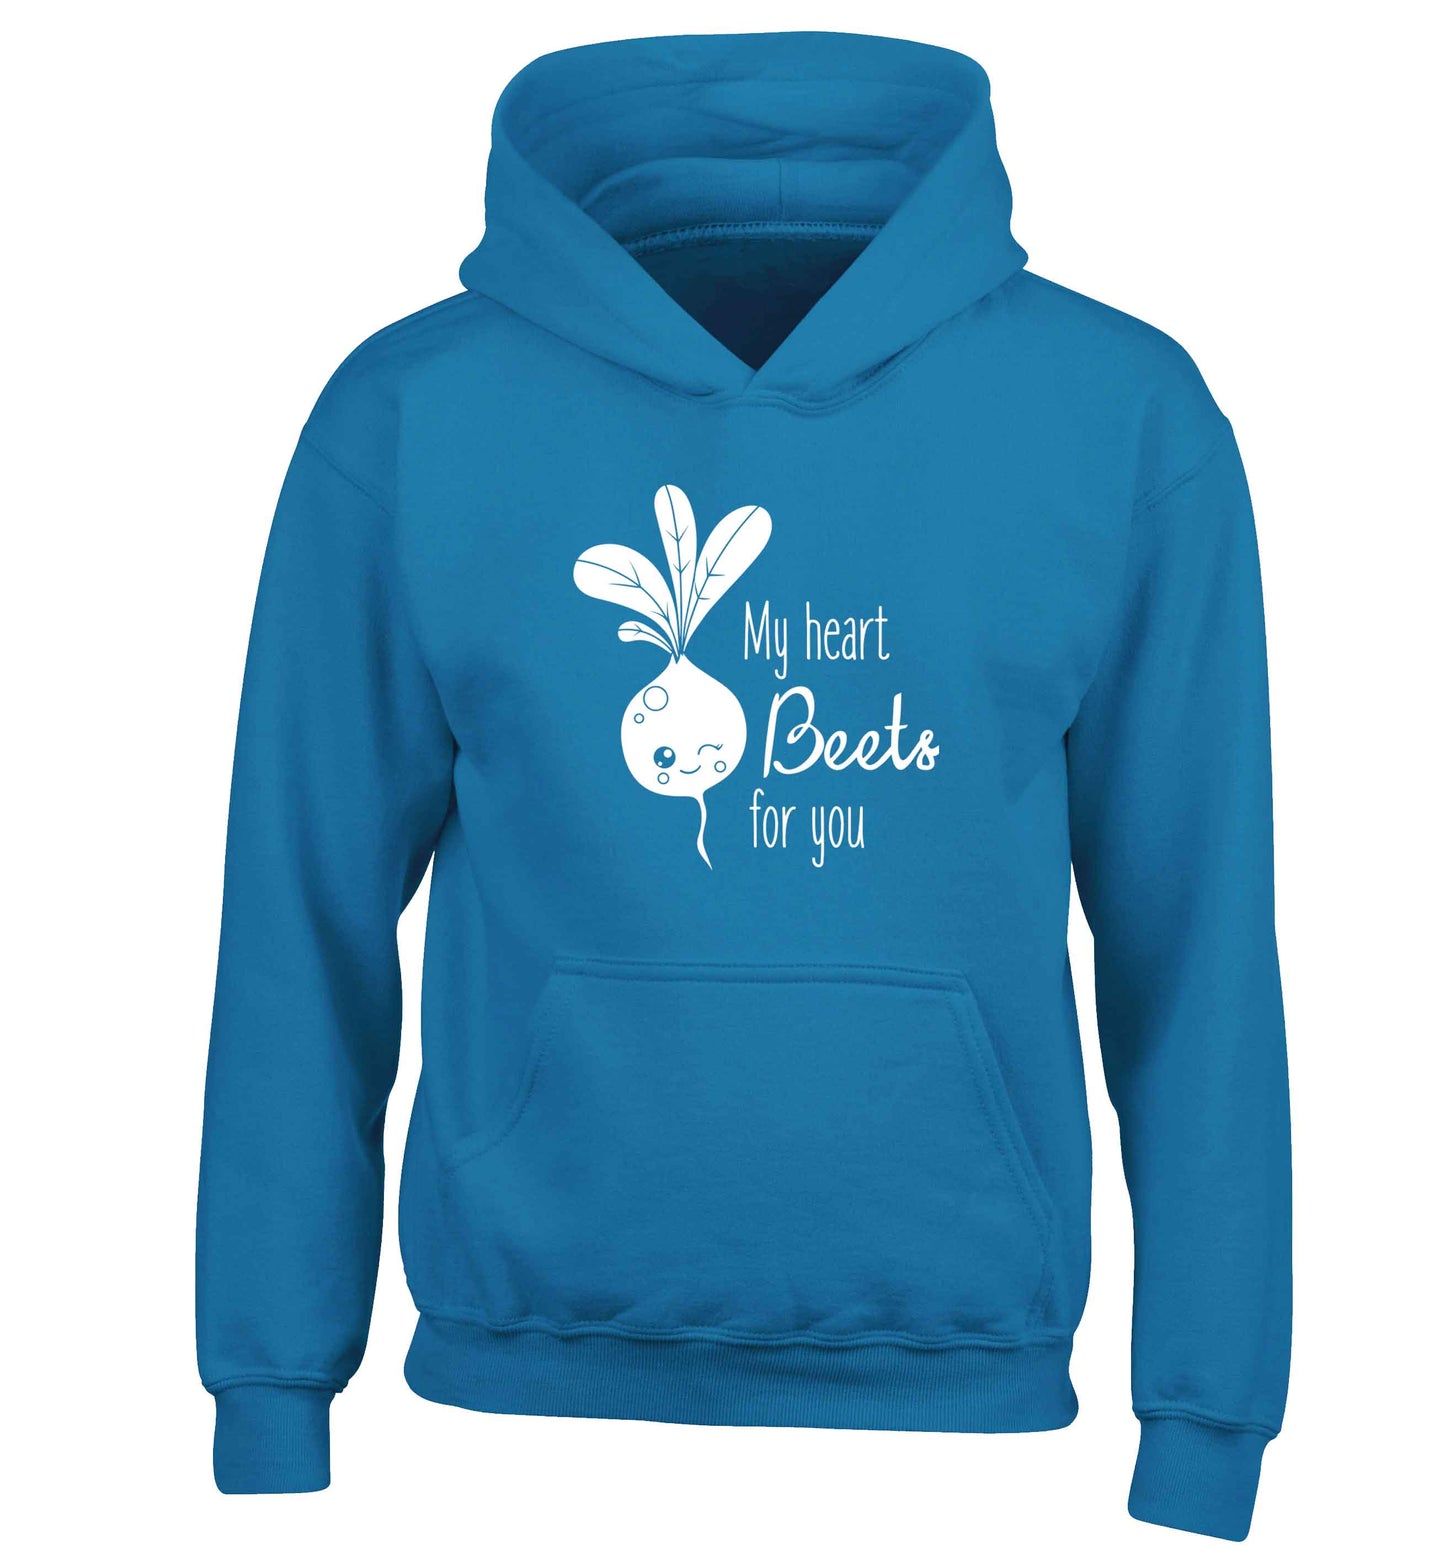 My heart beets for you children's blue hoodie 12-13 Years